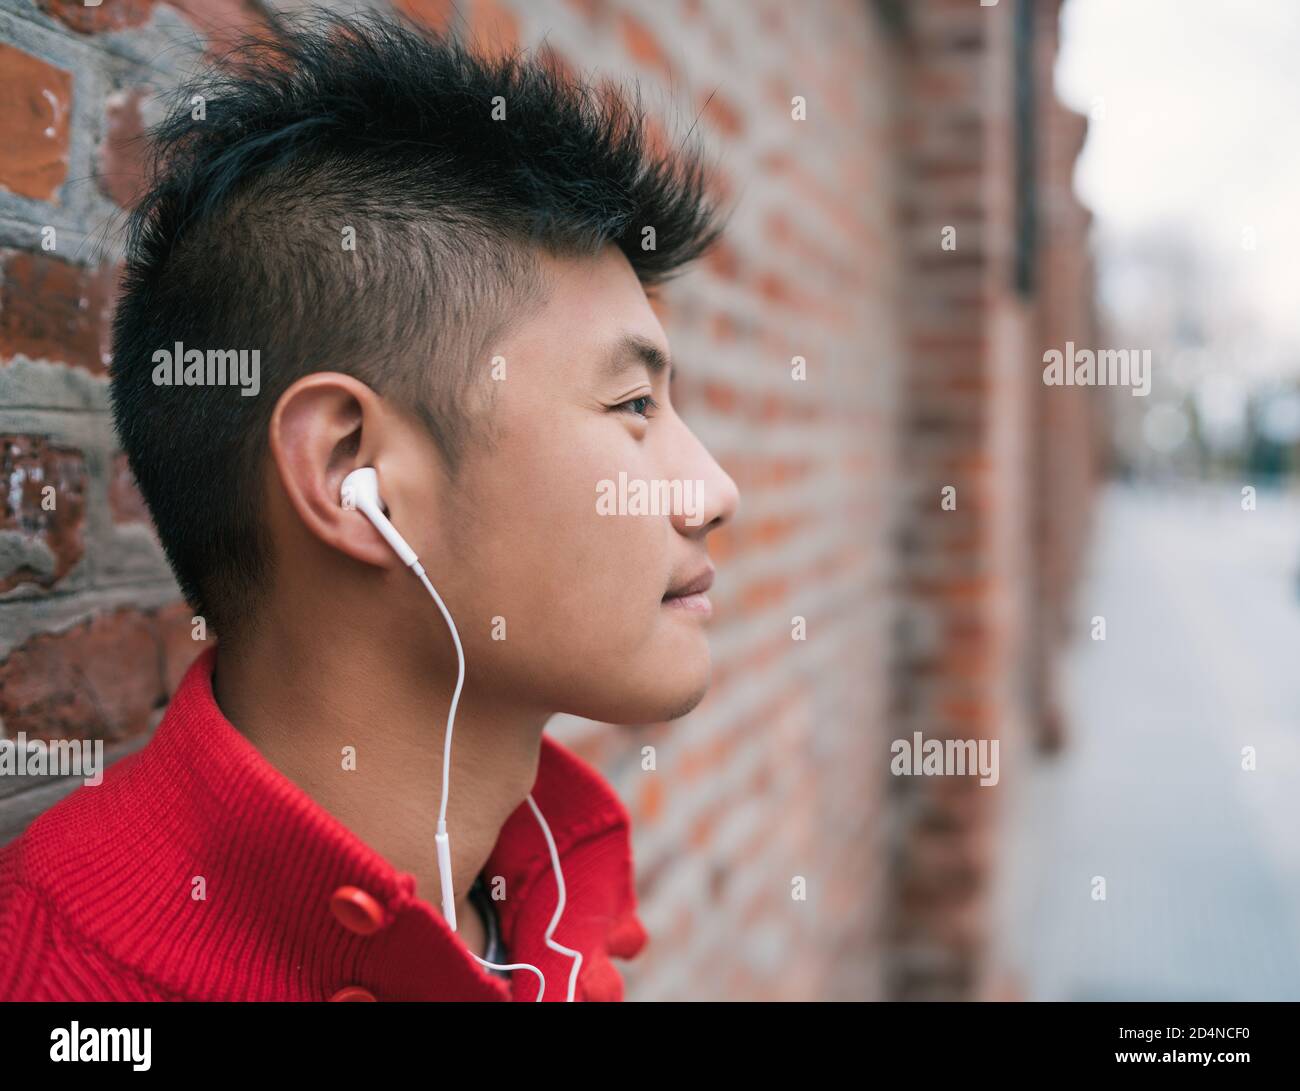 Portrait of young Asian boy listening to music with earphones outdoors in the streetl. Urban concept. Stock Photo